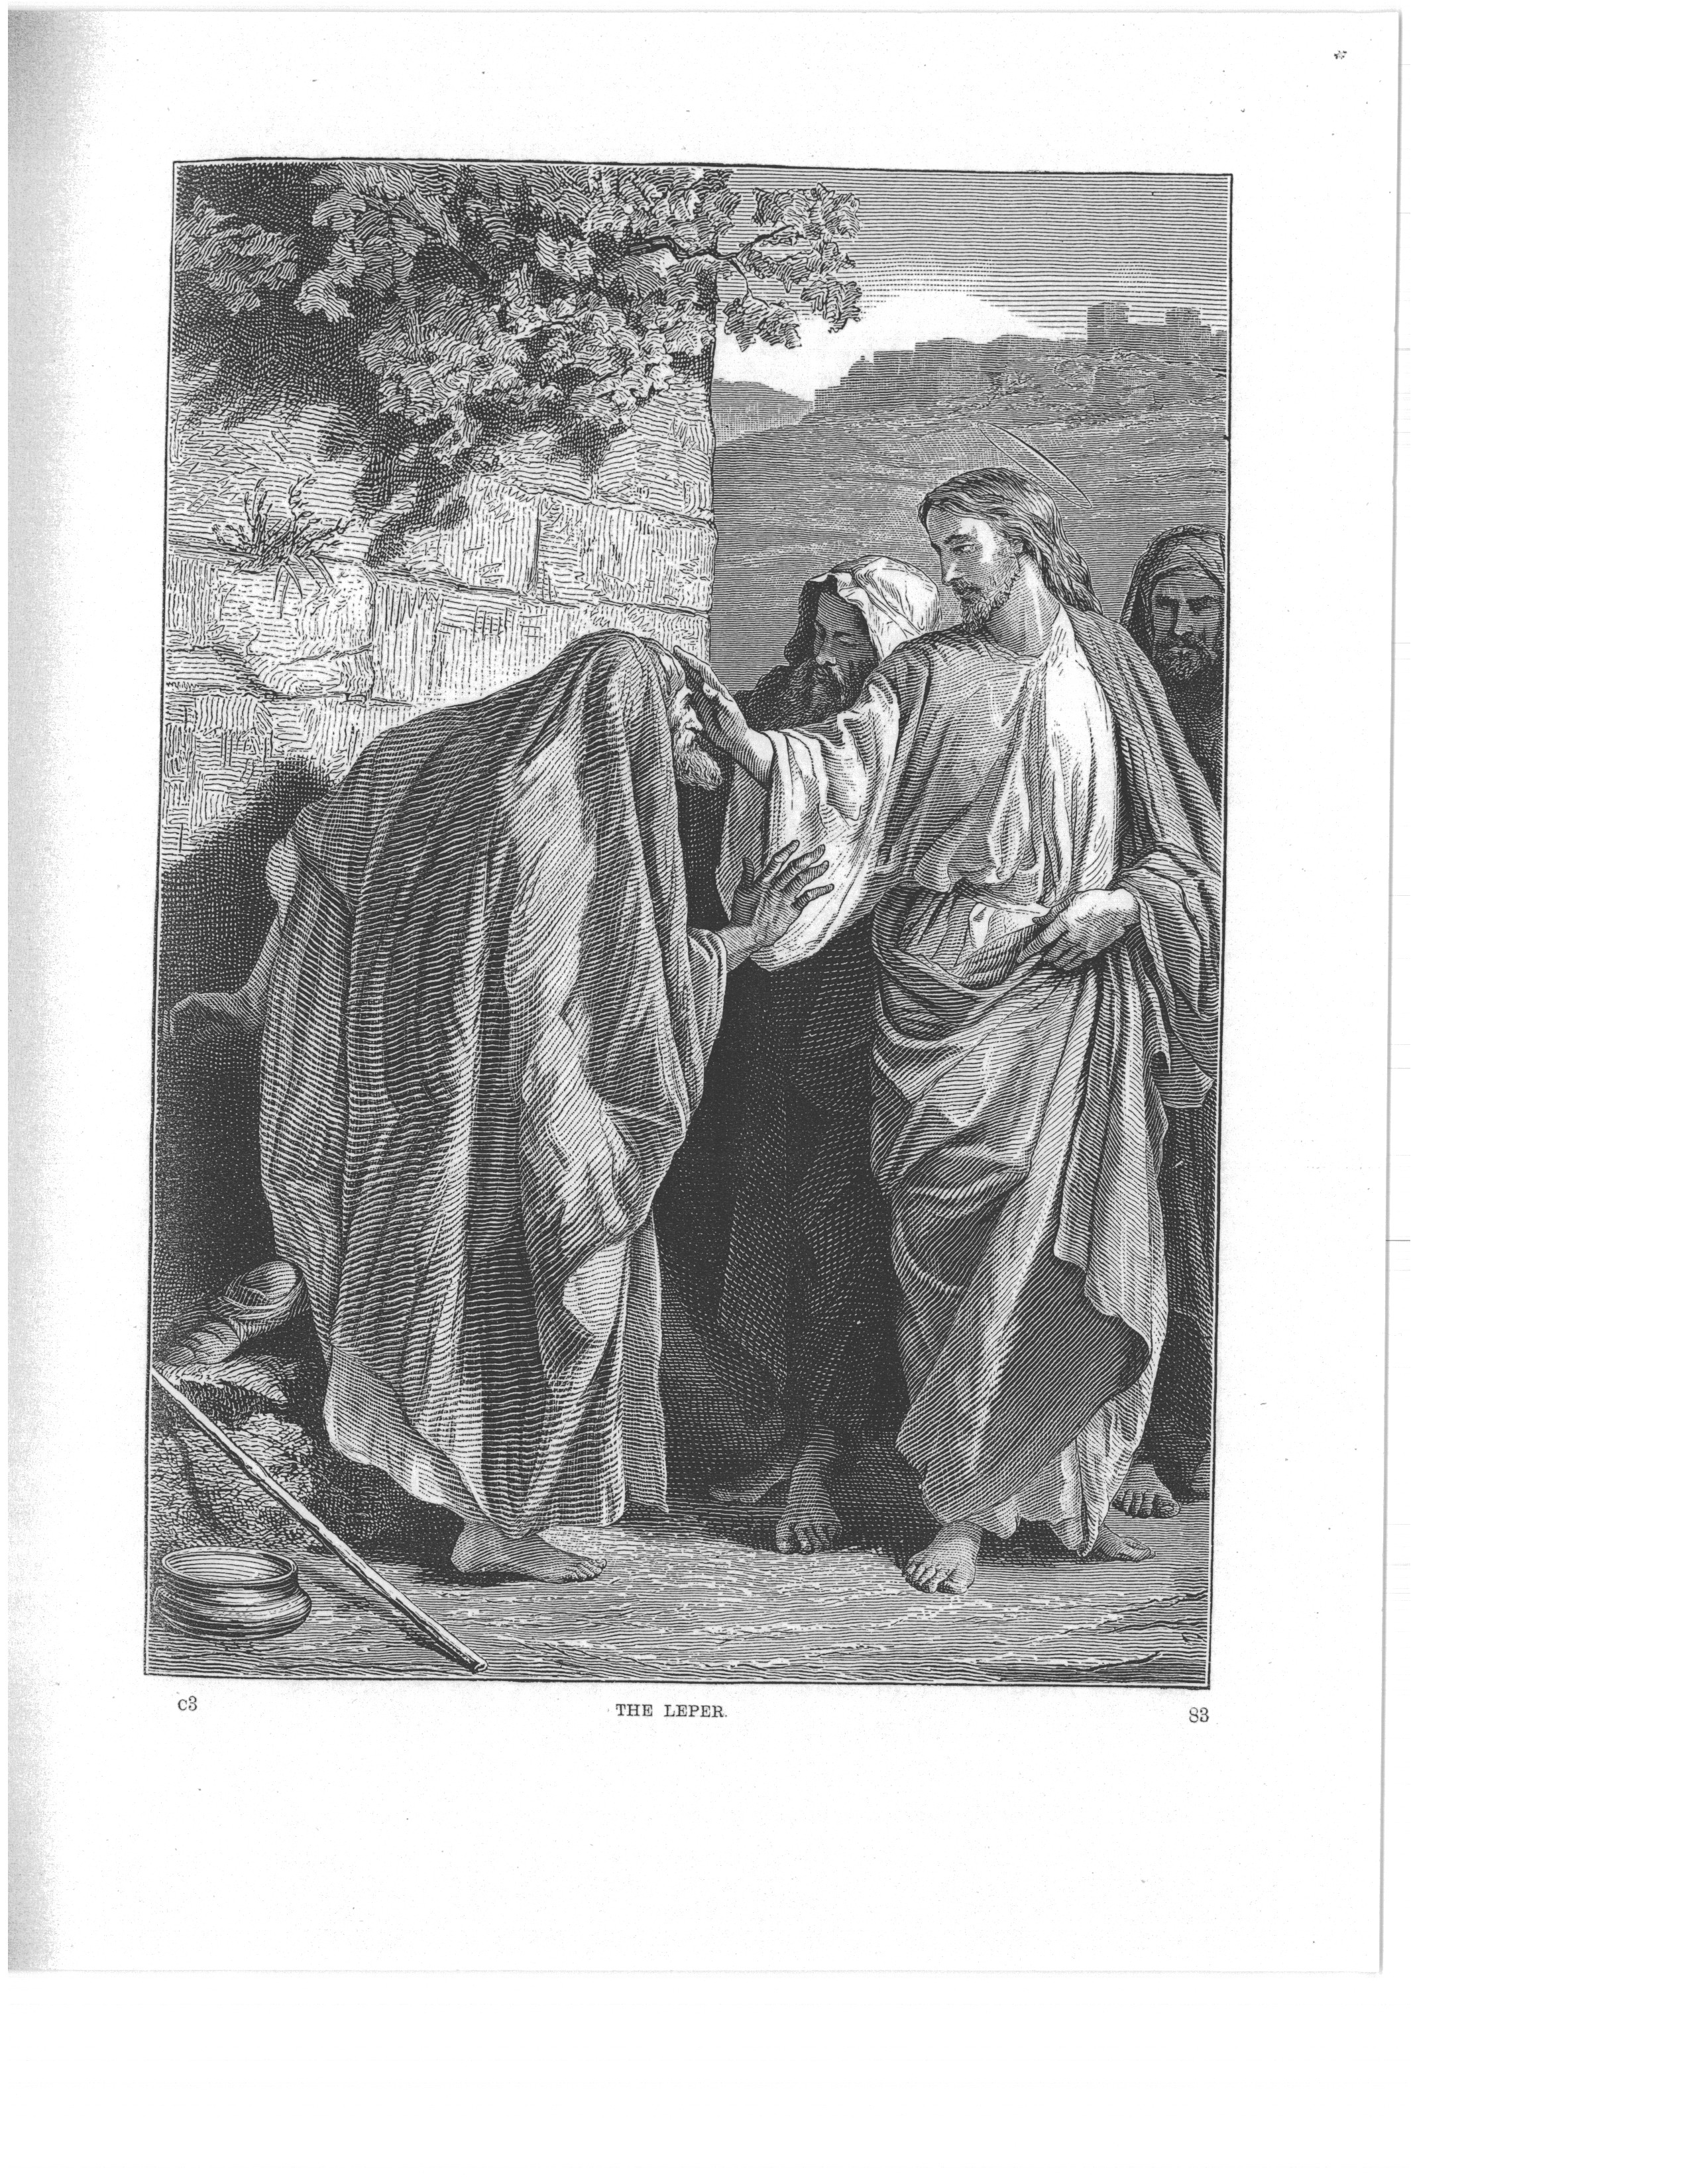 Artwork by Alexandre Bida of the Life of Christ - GCI Archive